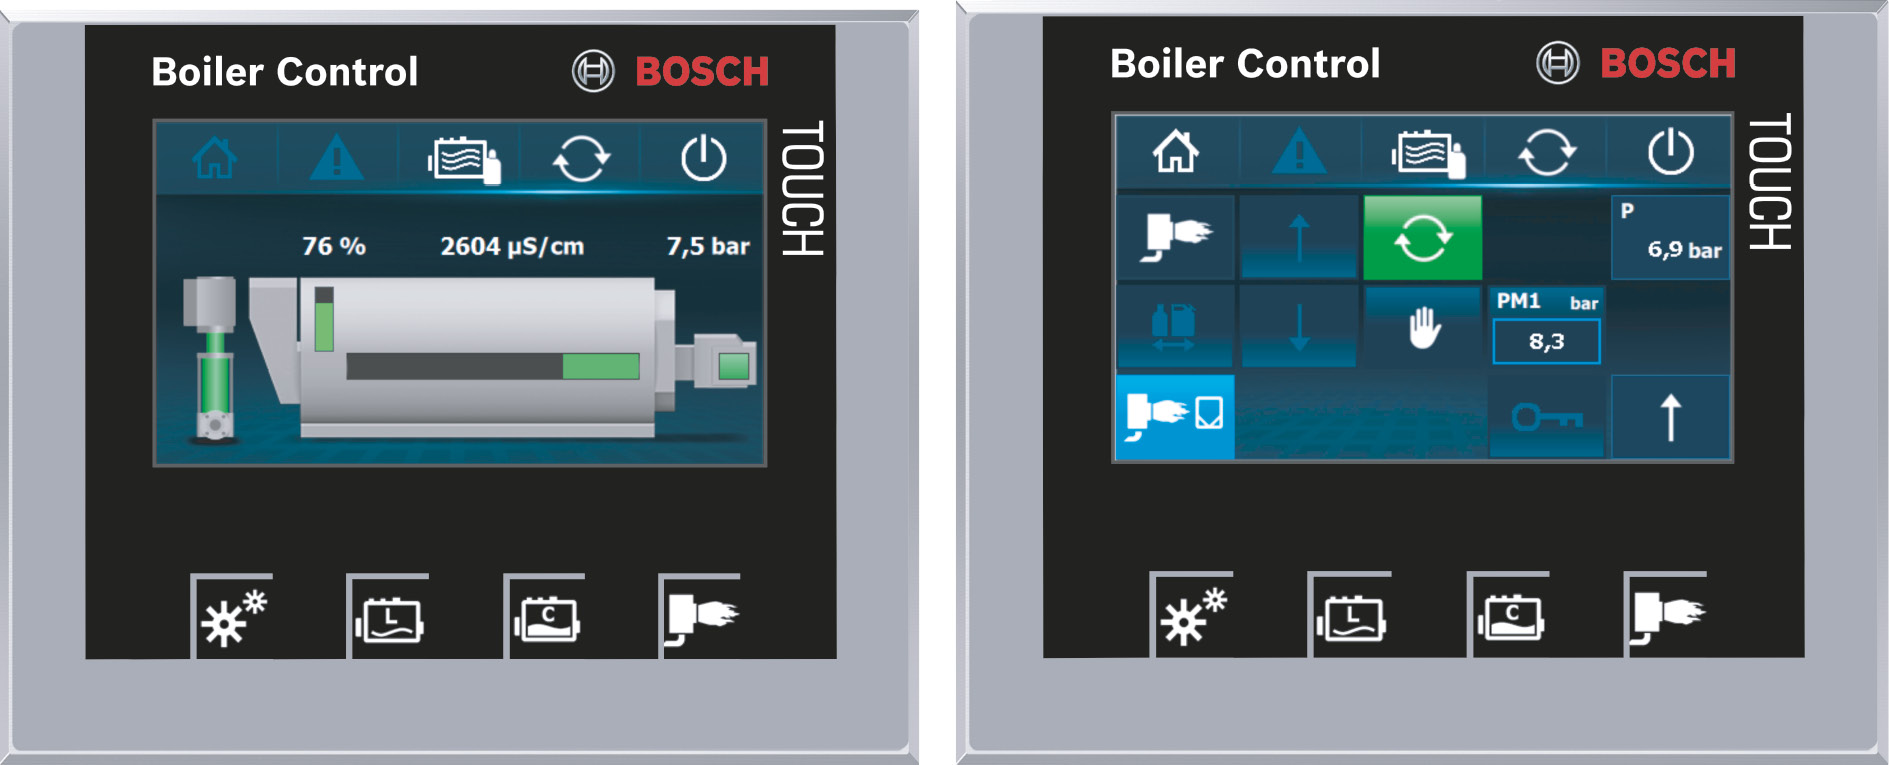 Examples of user guidance at the Boiler Control CSC